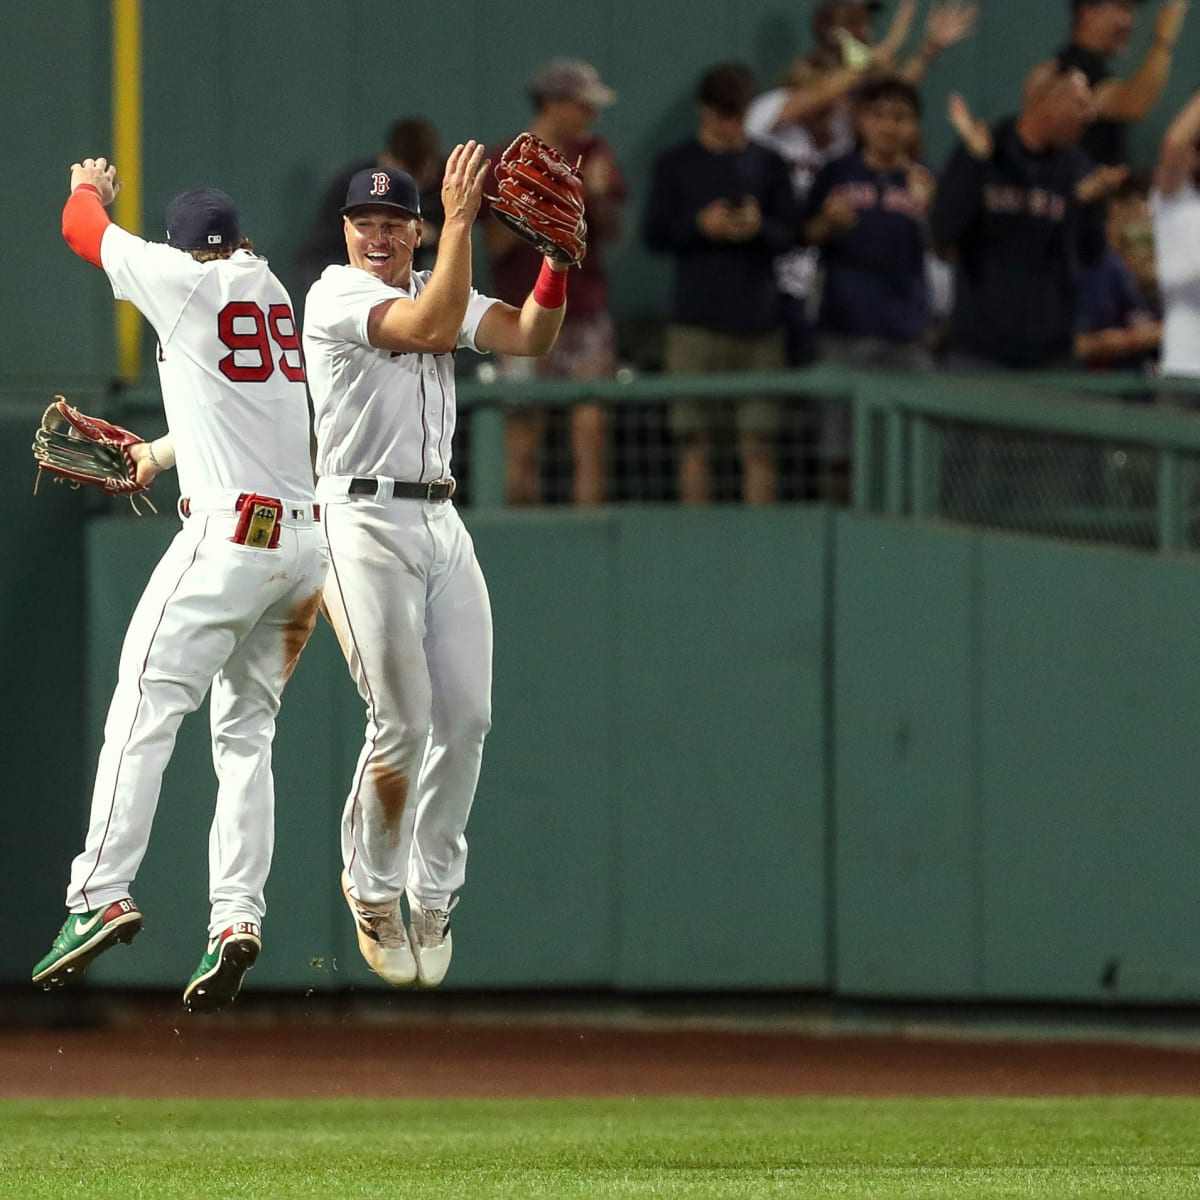 Red Sox-Rays: Hunter Renfroe's throw wins the game (video